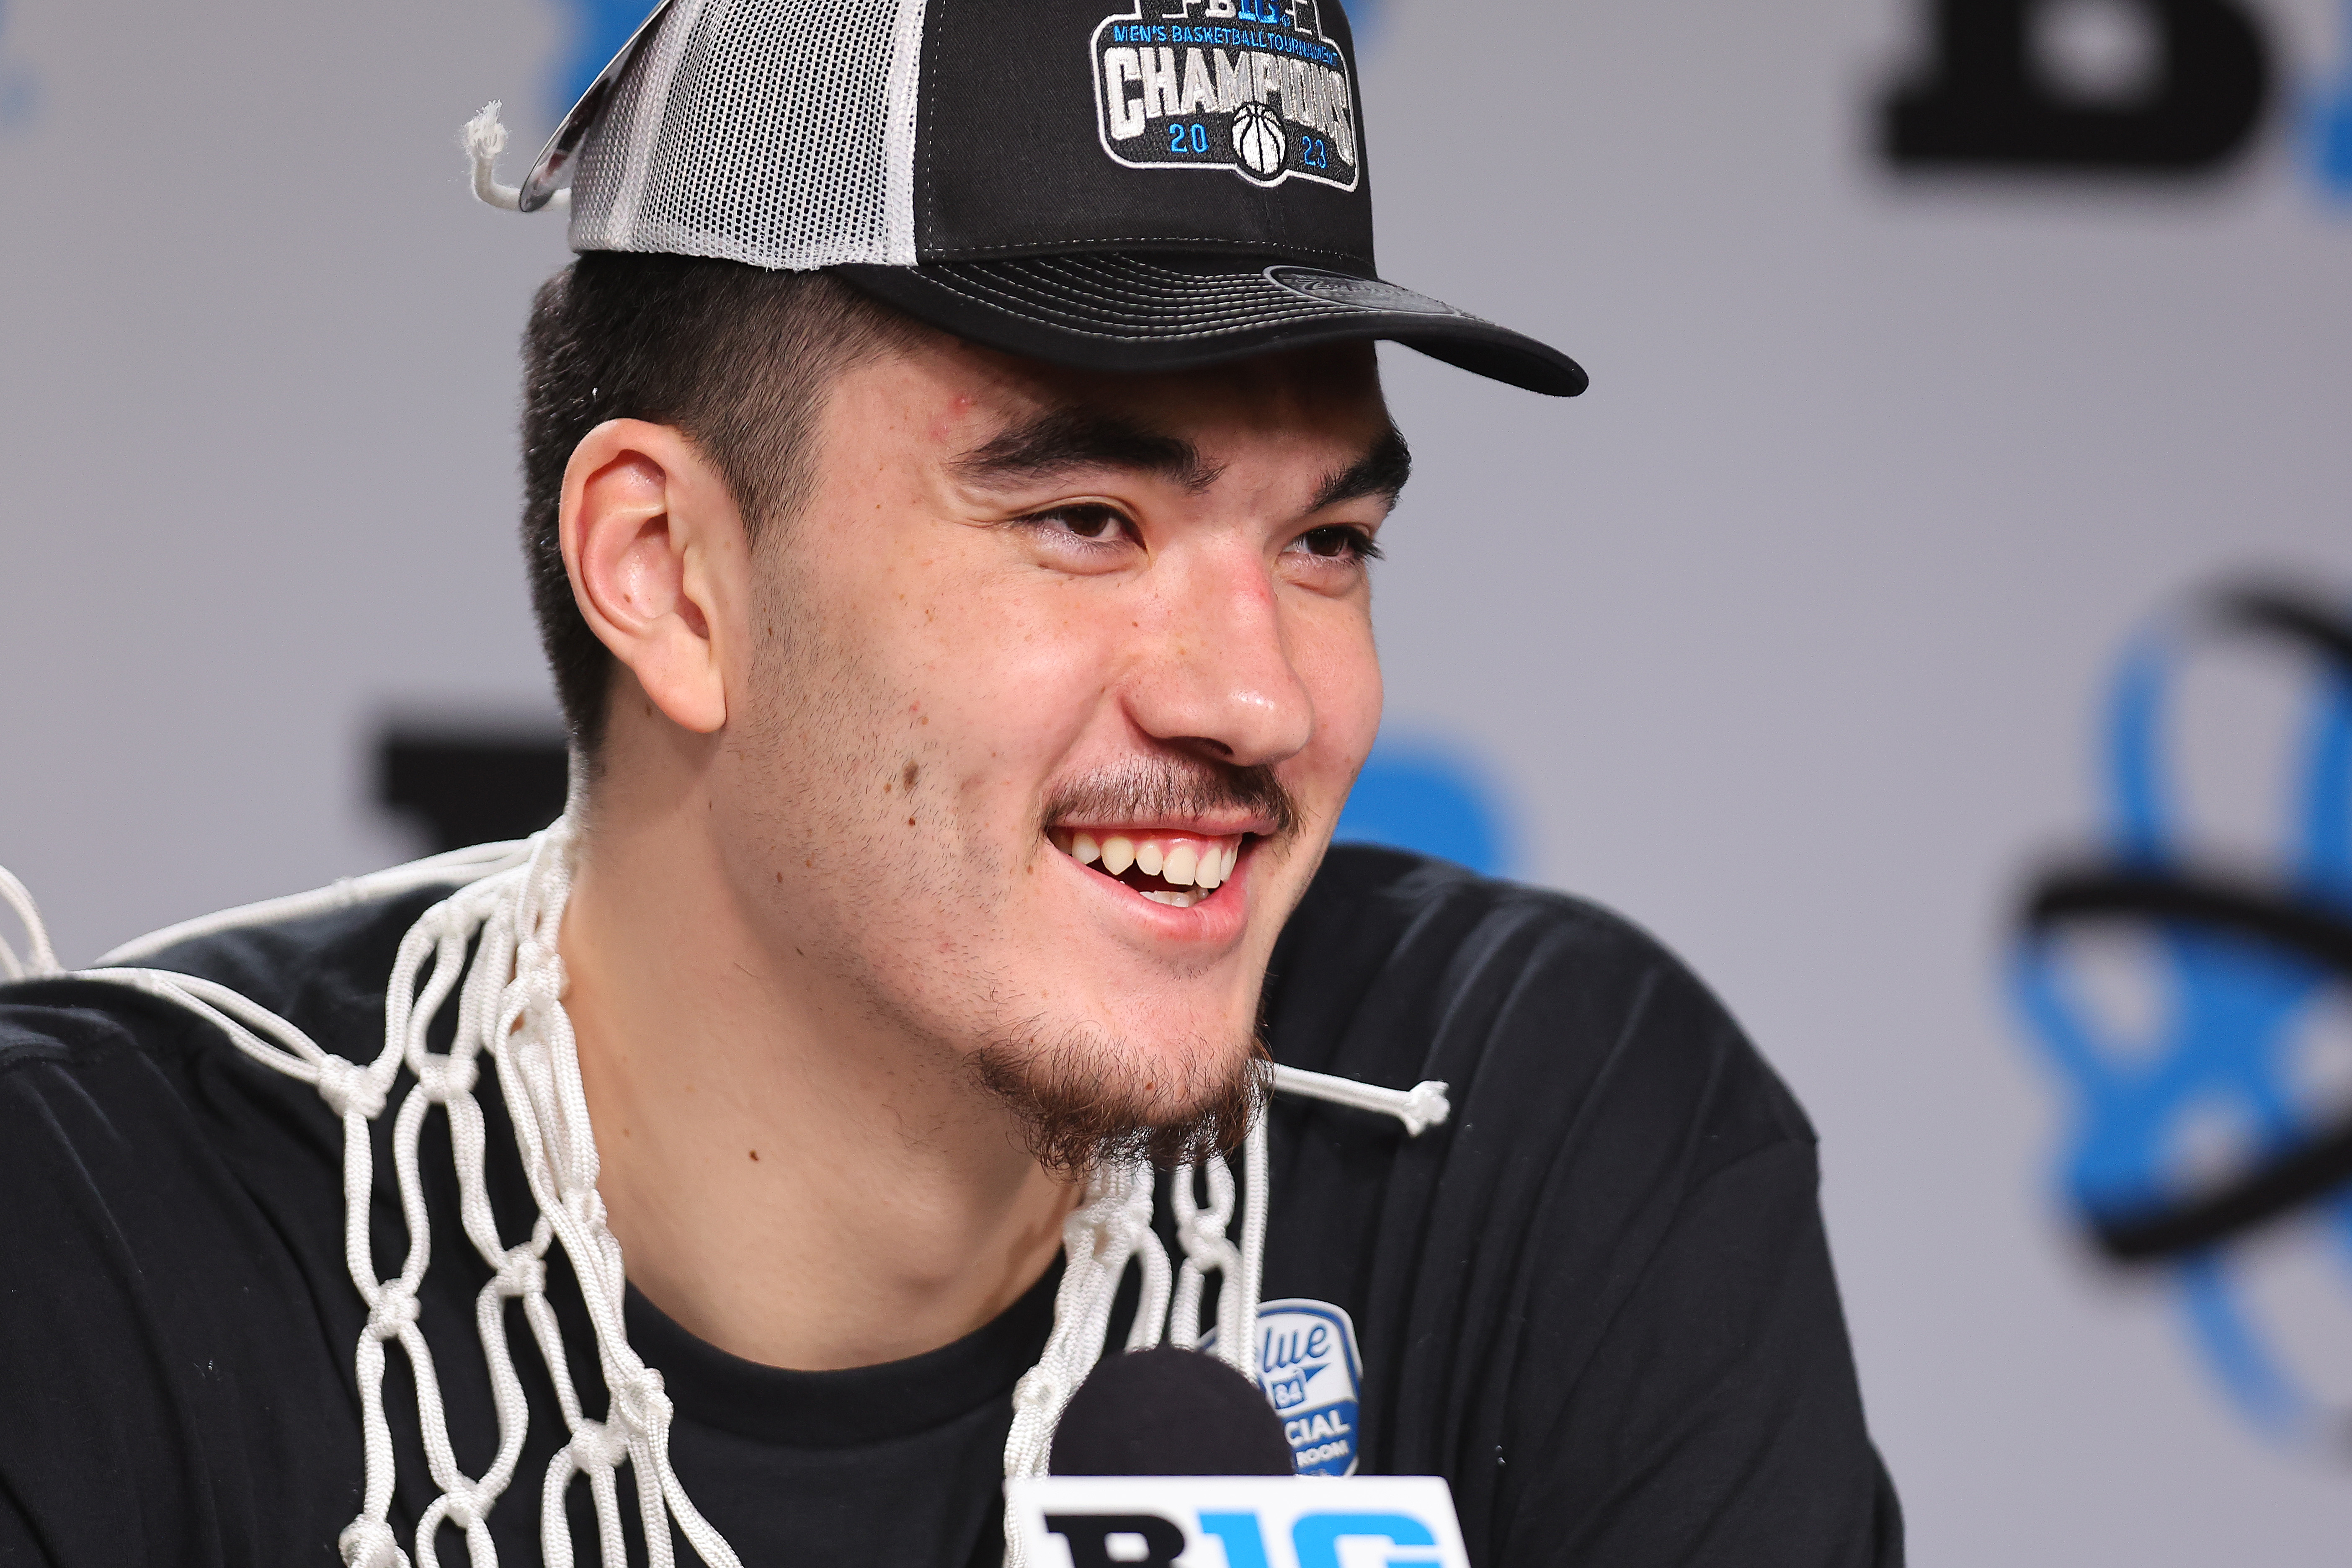 Zach Edey of Purdue University faces the media after defeating the Penn State Nittany Lions in the Big Ten Basketball Tournament Championship at United Center on March 12, 2023, in Chicago, Illinois. | Source: Getty Images